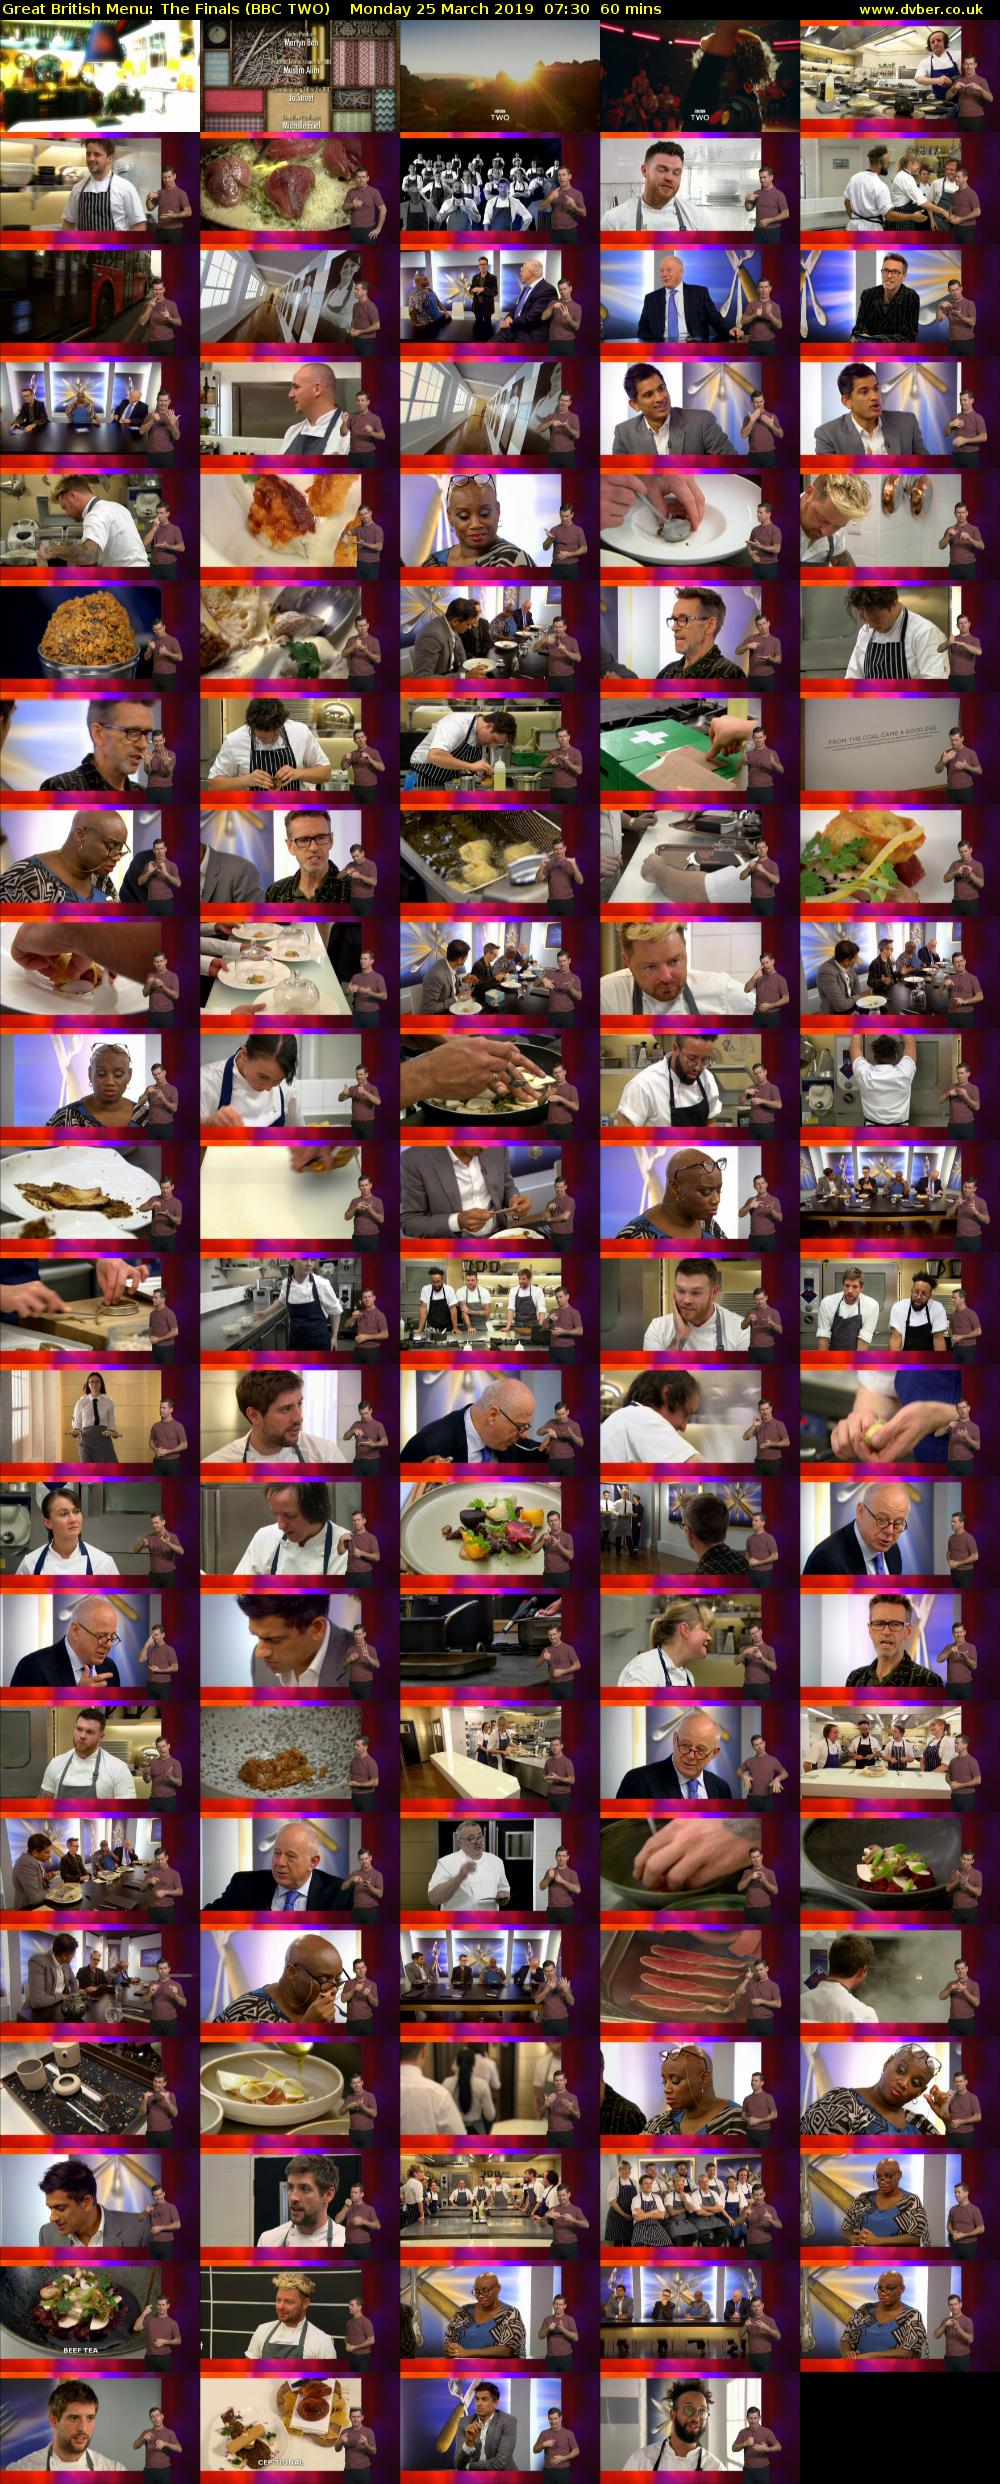 Great British Menu: The Finals (BBC TWO) Monday 25 March 2019 07:30 - 08:30